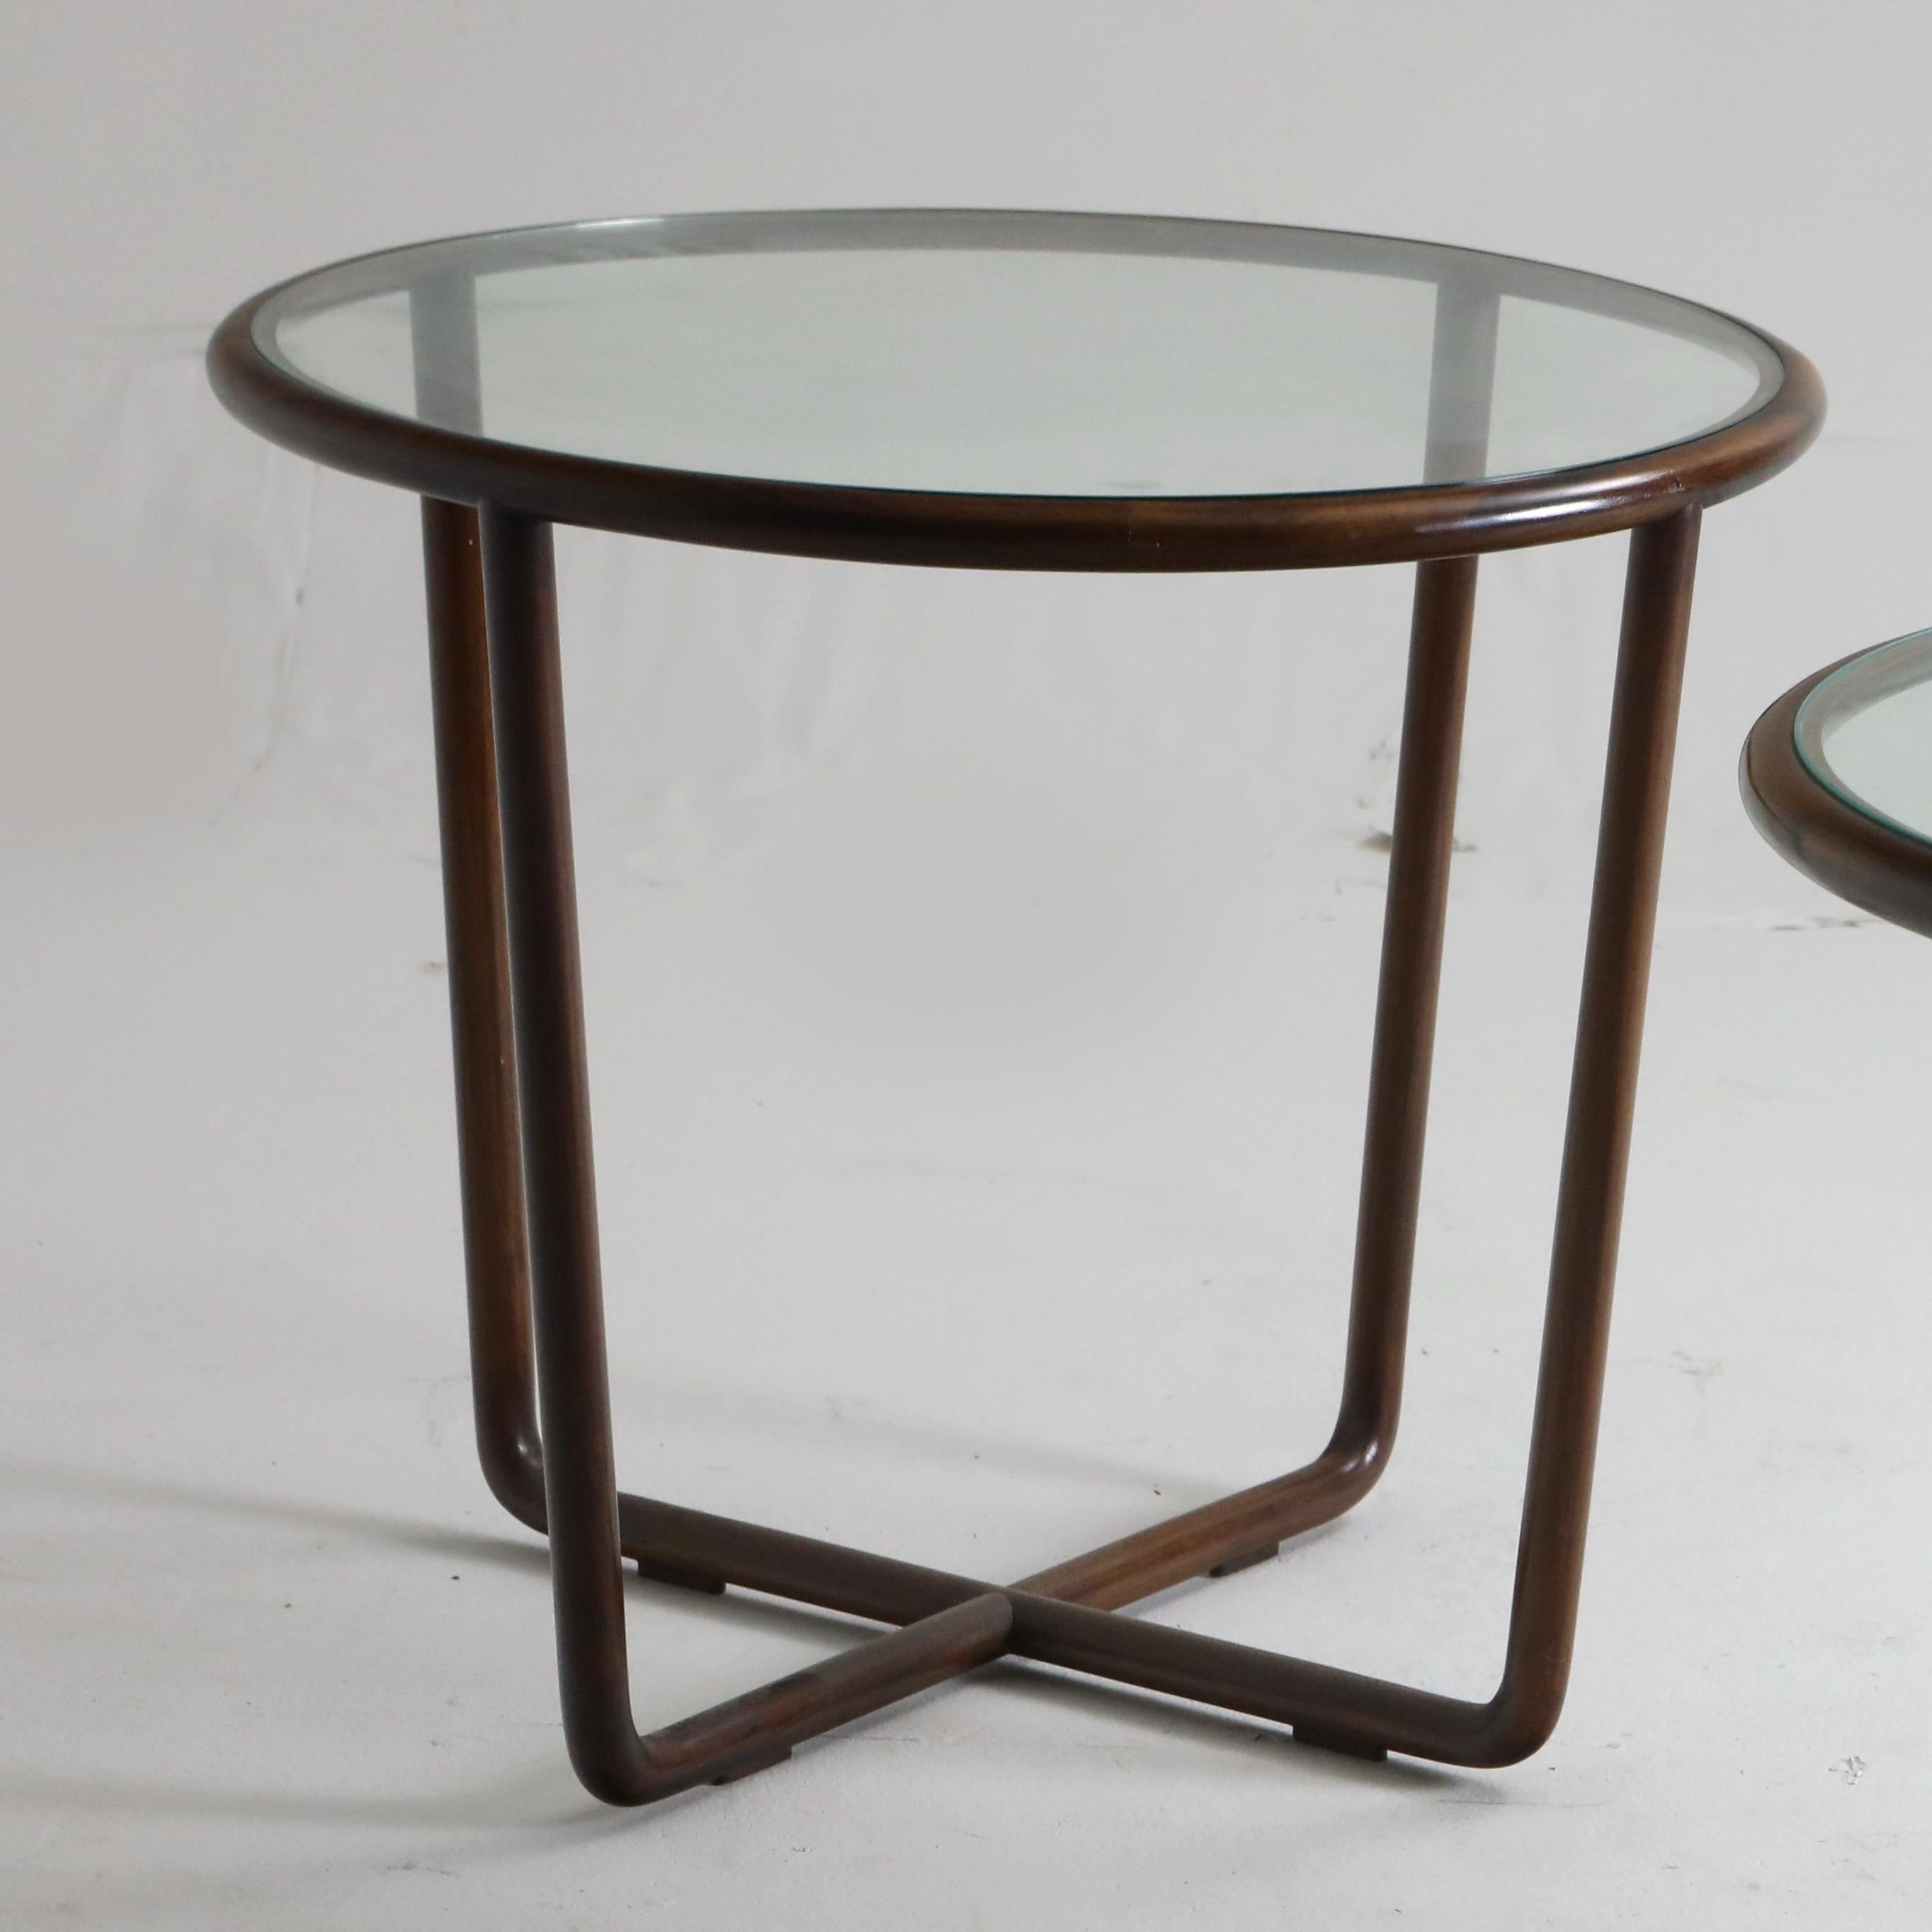 Brazilian Mid-Century Modern Side Table in Wood and Glass Top Designed by Joaquim Tenreiro